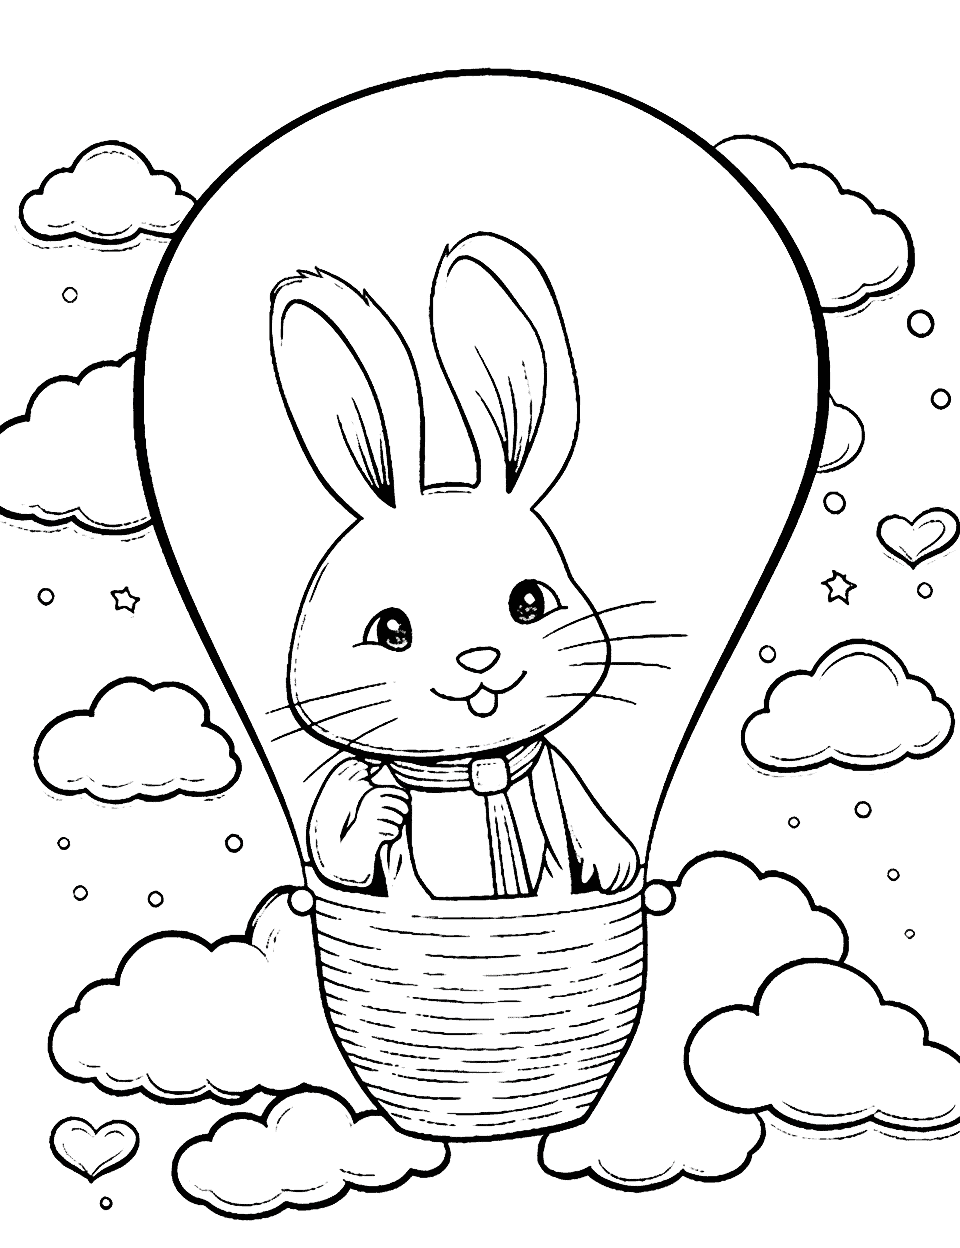 Bunny in a Hot Air Balloon Easter Coloring Page - A bunny floating in a whimsical hot air balloon, soaring through the sky surrounded by clouds and Easter-themed decorations.